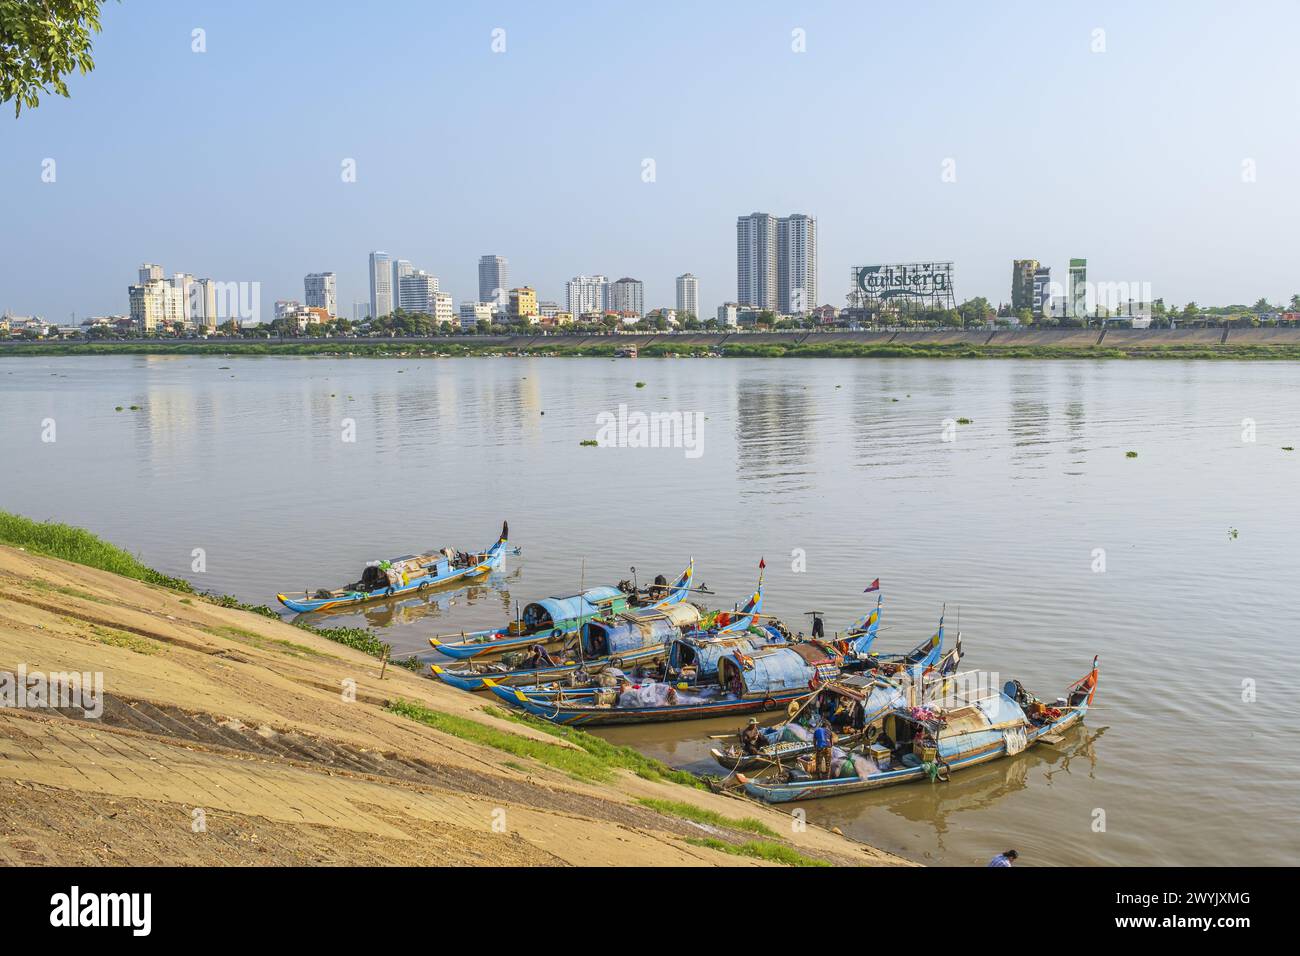 Cambodia, Phnom Penh, Tonle Sap river and the buildings of the Chroy Changvar district Stock Photo